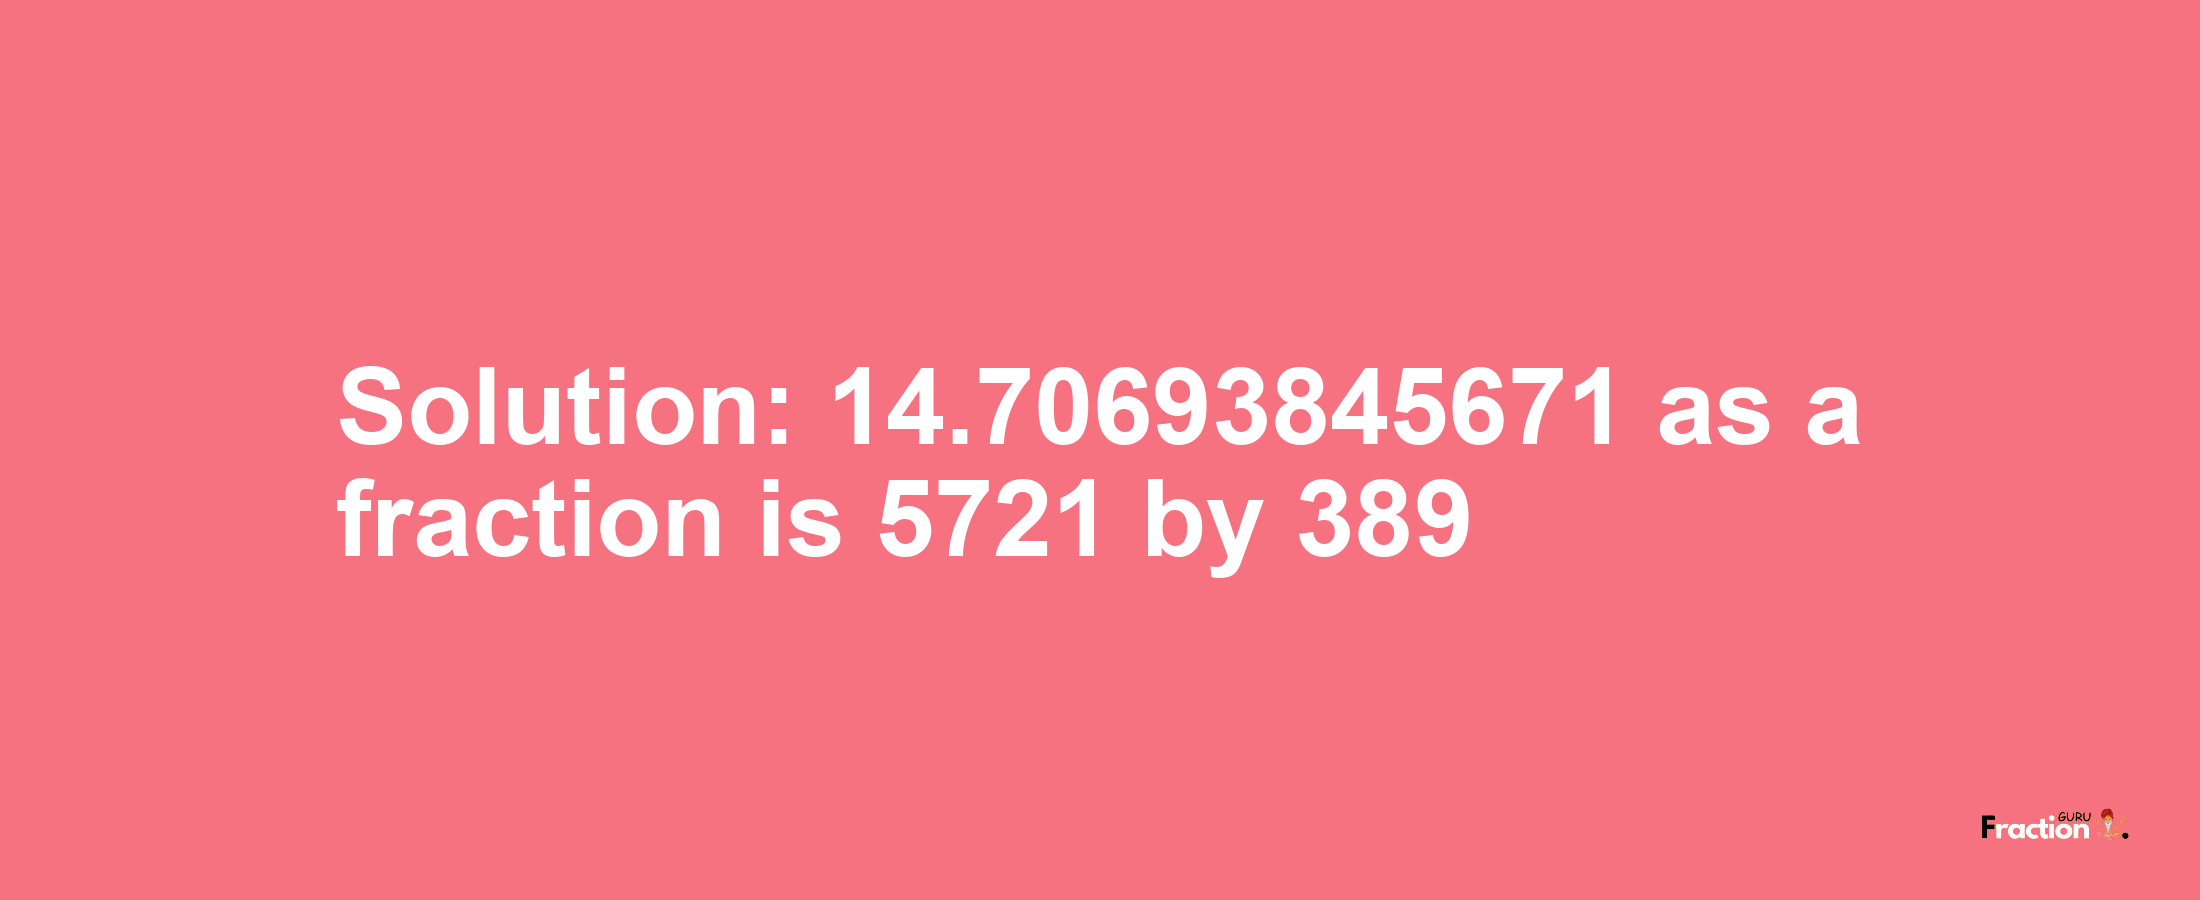 Solution:14.70693845671 as a fraction is 5721/389